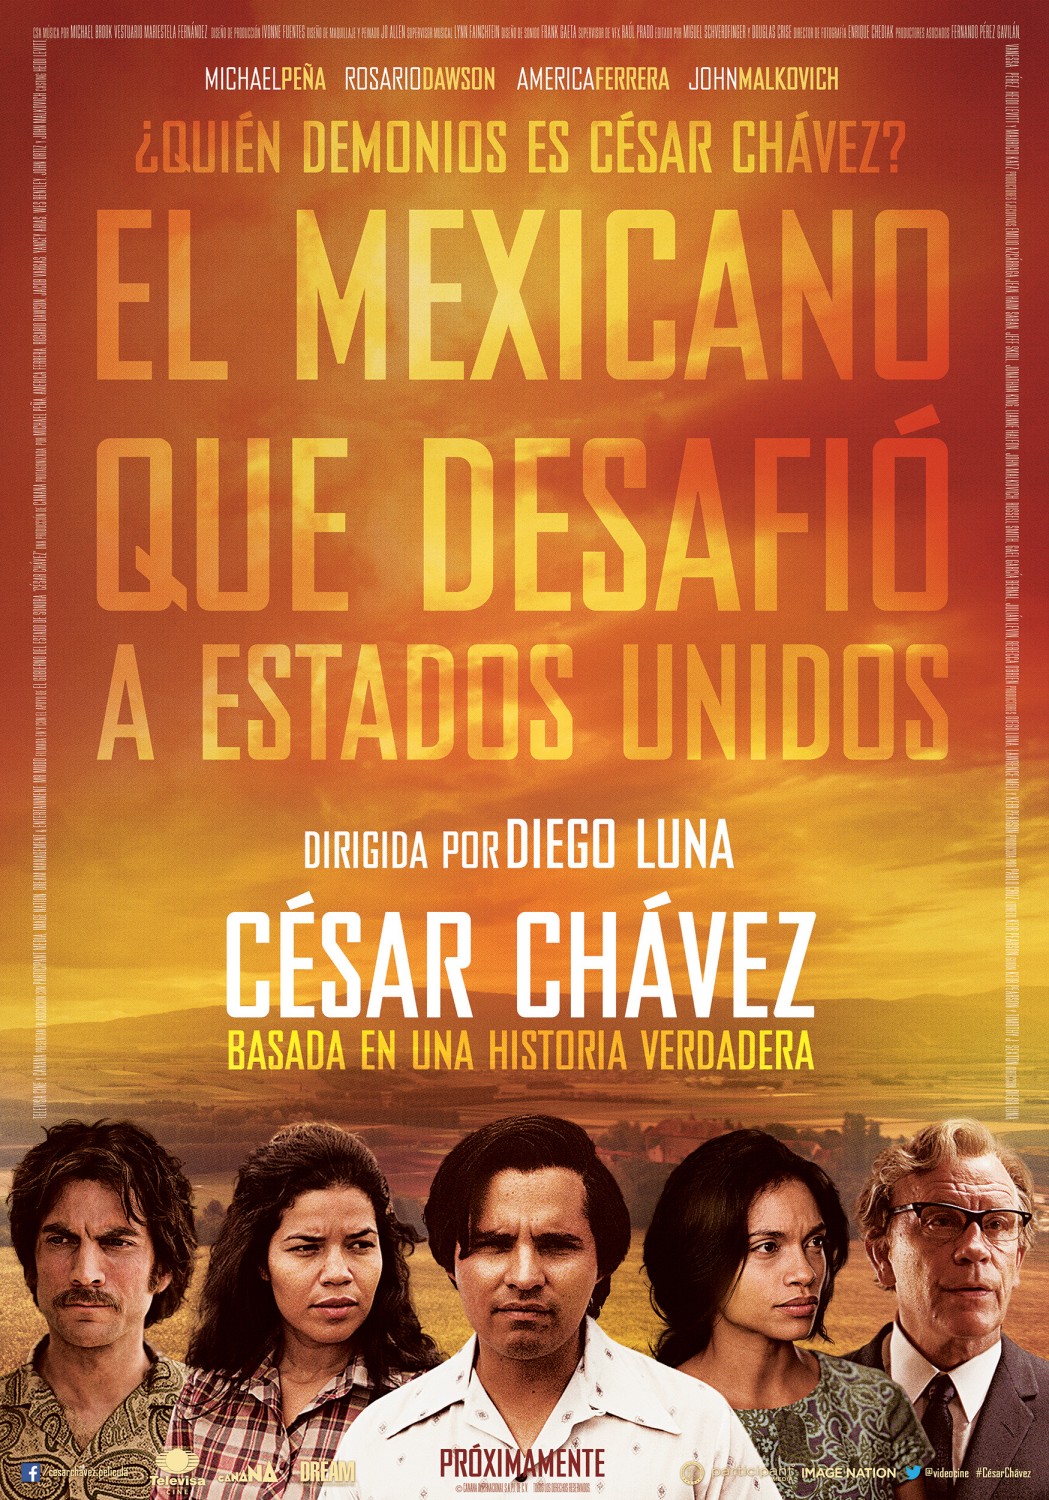 Extra Large Movie Poster Image for Cesar Chavez (#4 of 9)